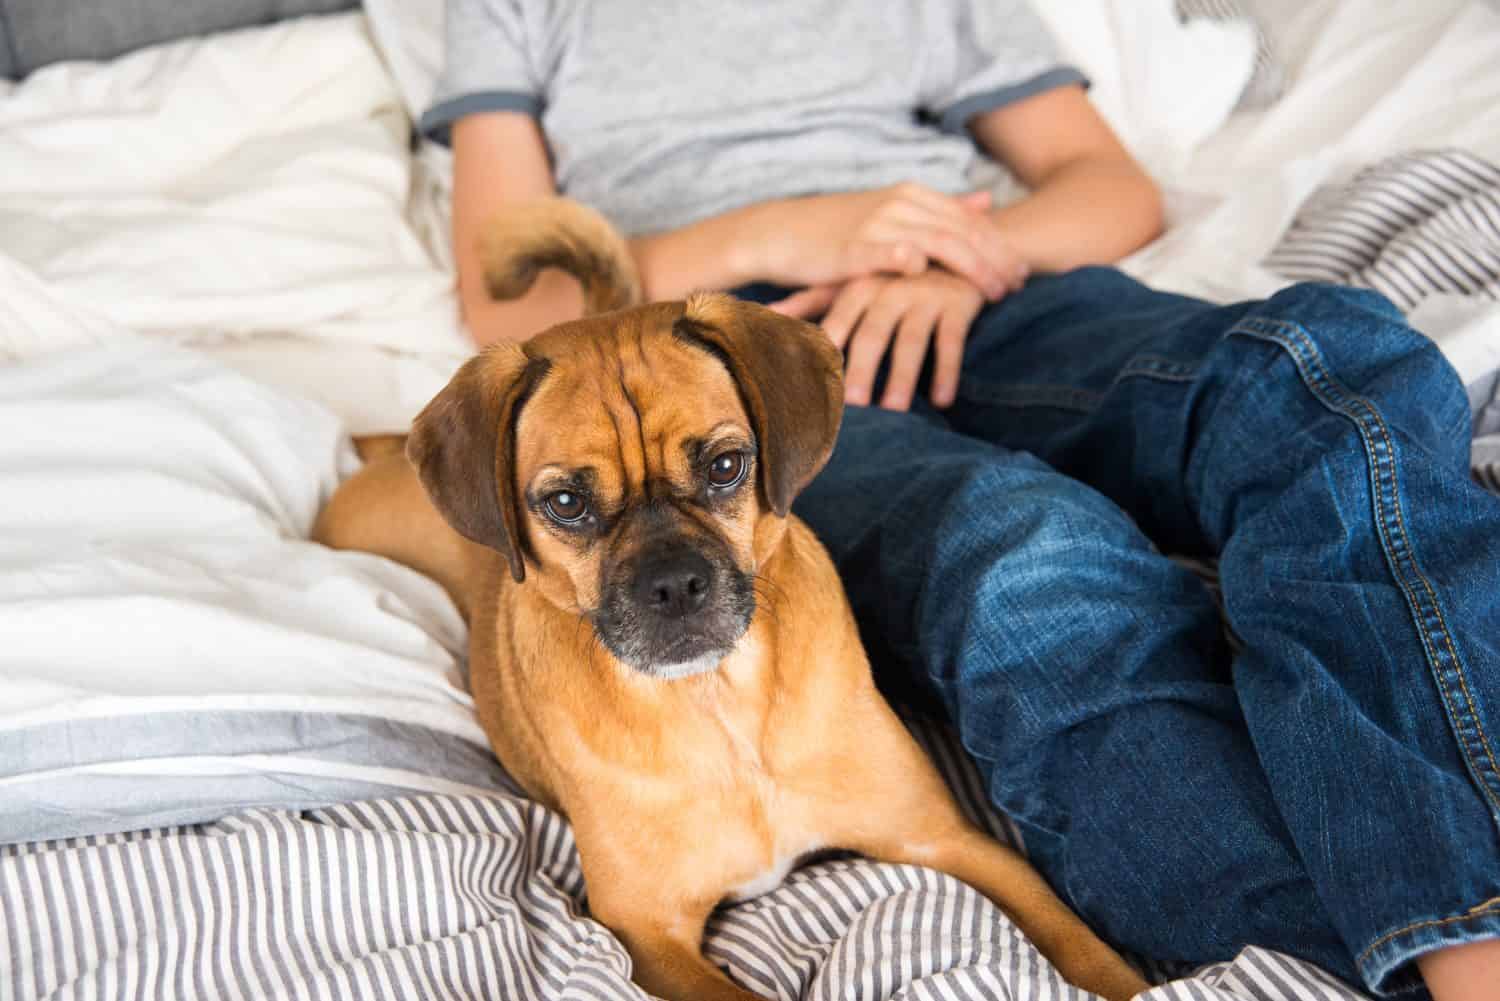 Cute Puggle Dog Relaxing in Bed Next to Owner